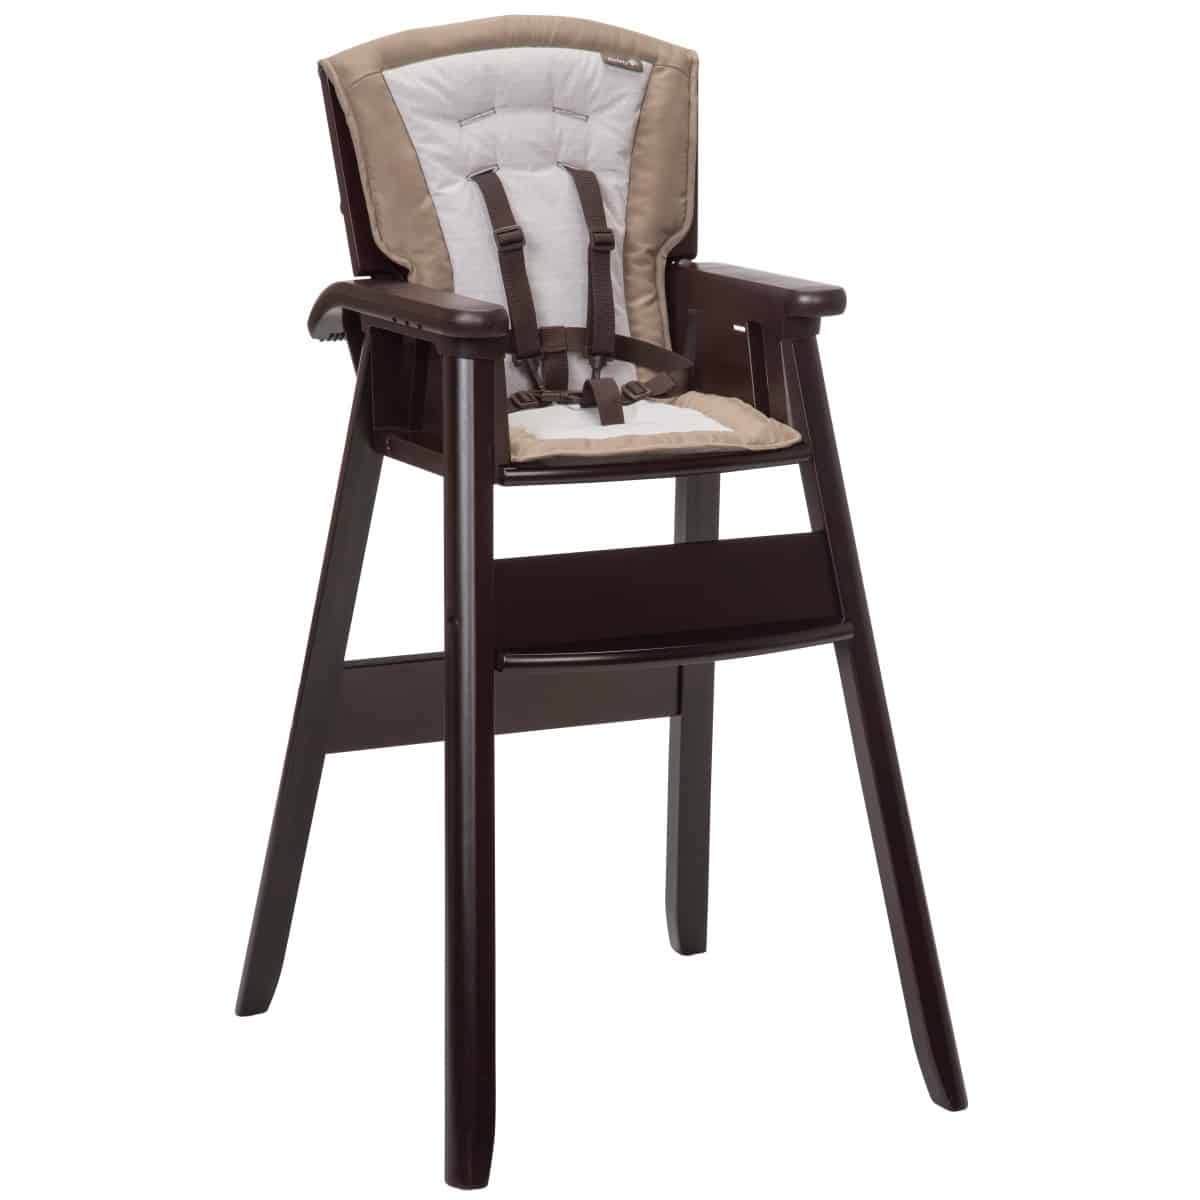 Safety 1st Dine and Recline high chair